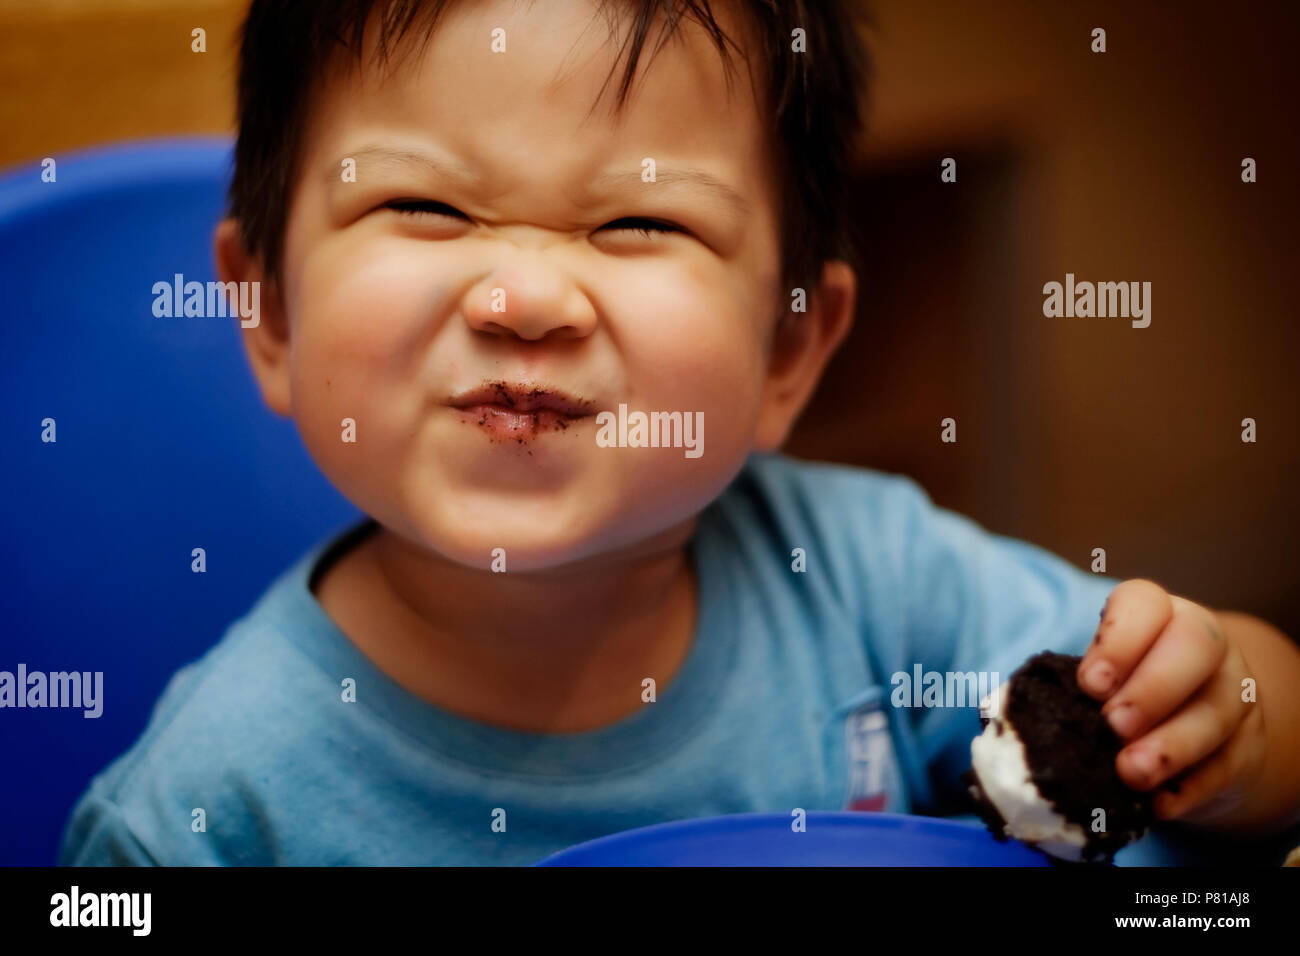 Close up of toddler or preschool aged boy with a goofy or extremely delighted expression and with crumbs on his lips as he eats an ice cream sandwich Stock Photo